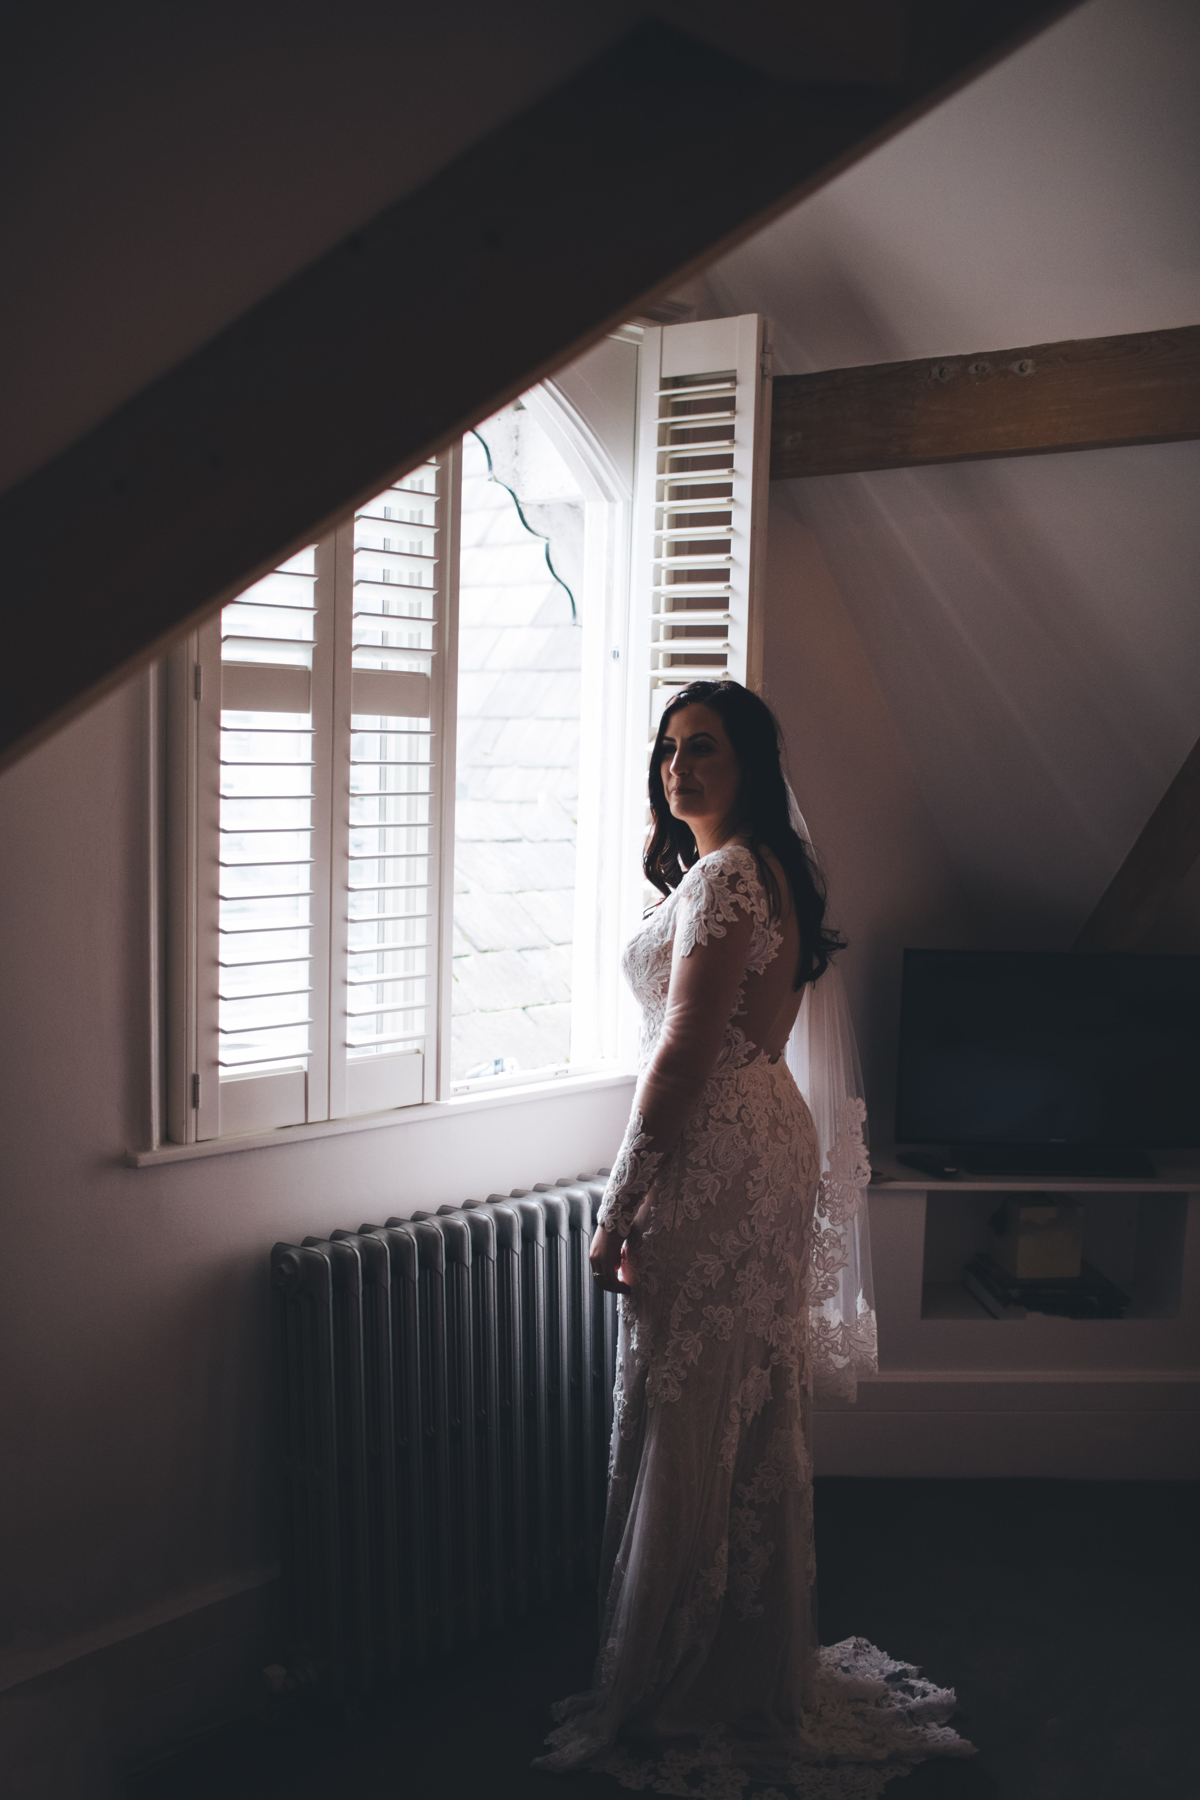 Bride stood in her wedding dress in front of a window with shutter blinds with a cast iron radiator below